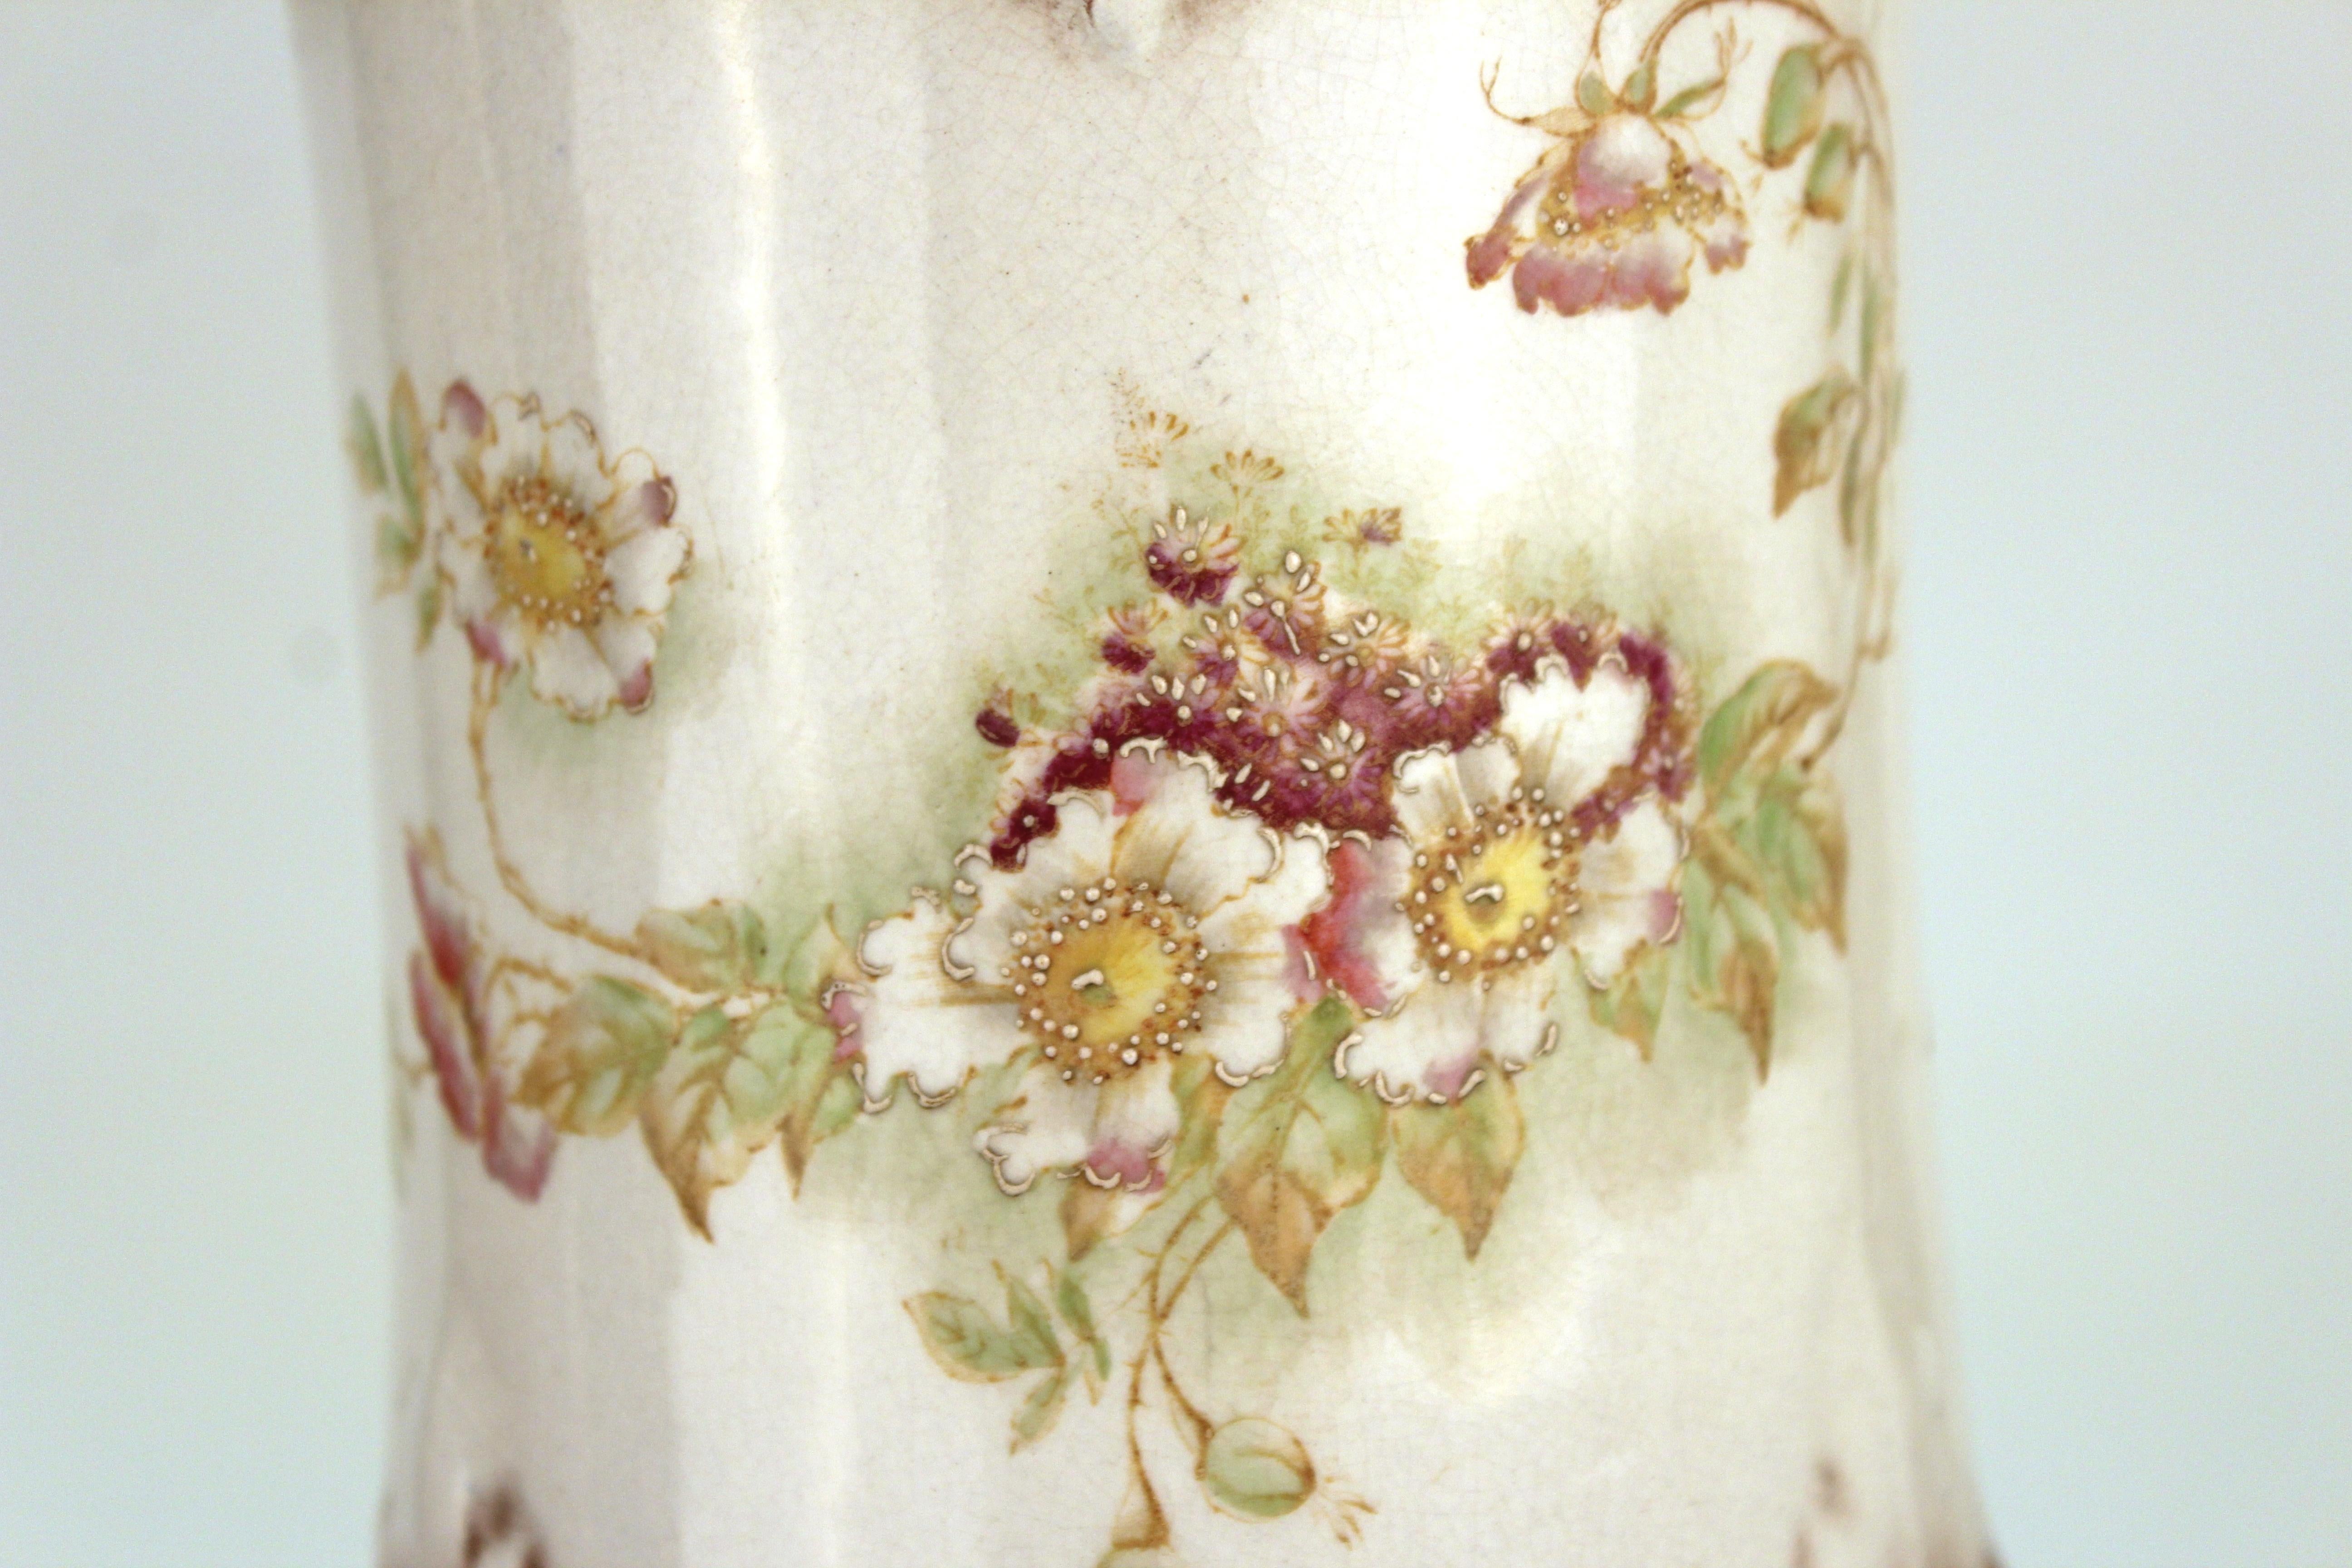 Victorian Alba China Ceramic Hand-Painted Pedestals in Grotesque Style 2